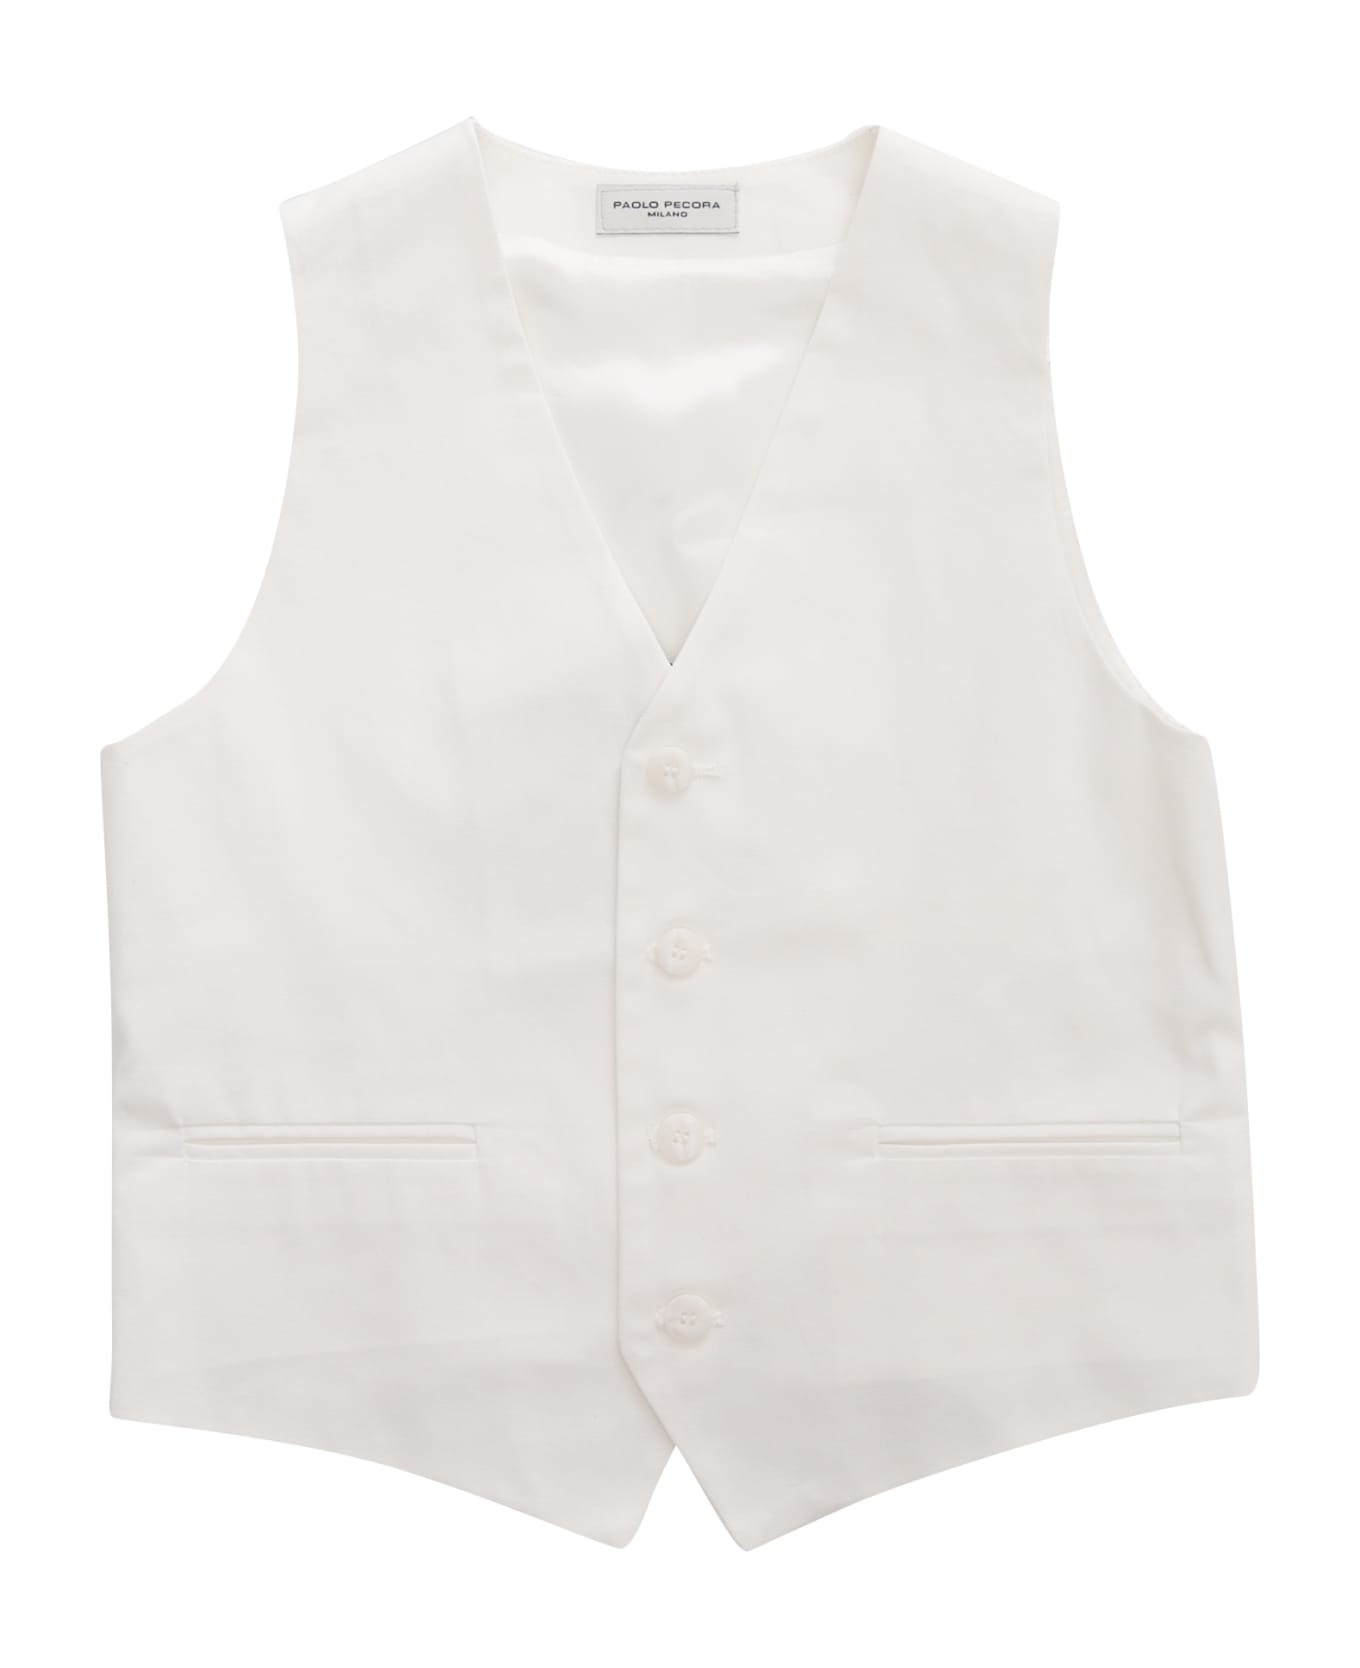 Paolo Pecora Tailored Vest - WHITE トップス